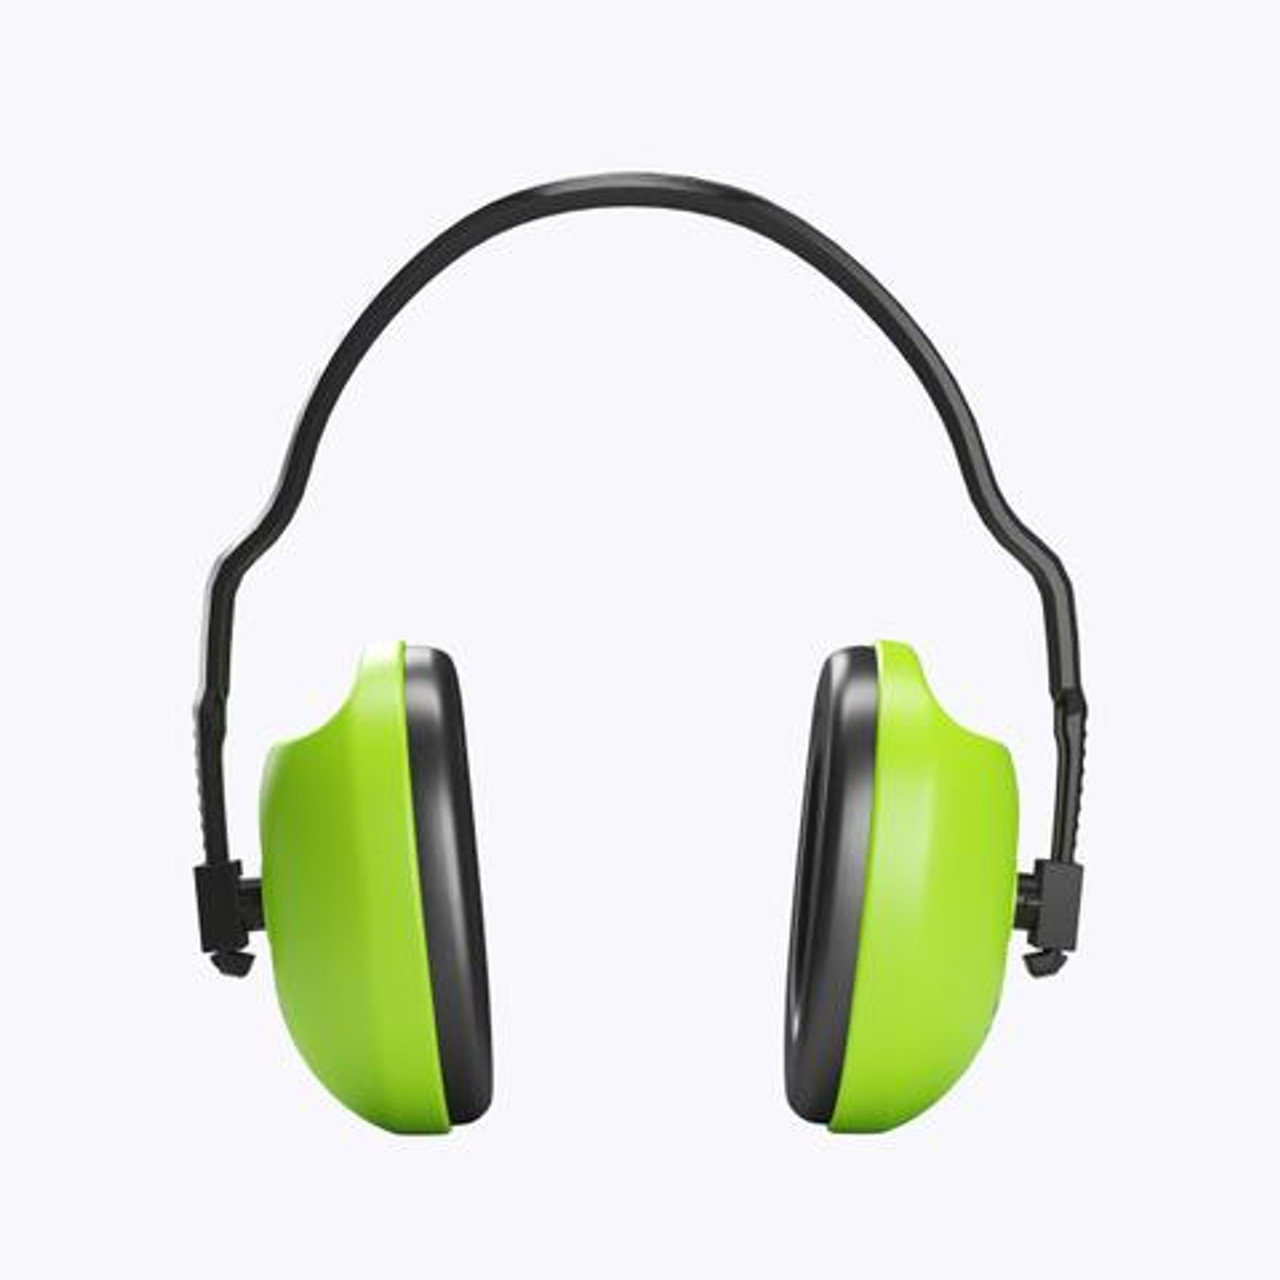 HELLBERG Ear Muffs | JUNIOR Green Class 2 Earmuffs  with Headband for Young Children, Formula 1 and V8 Supercars to create a total tool solution for construction.